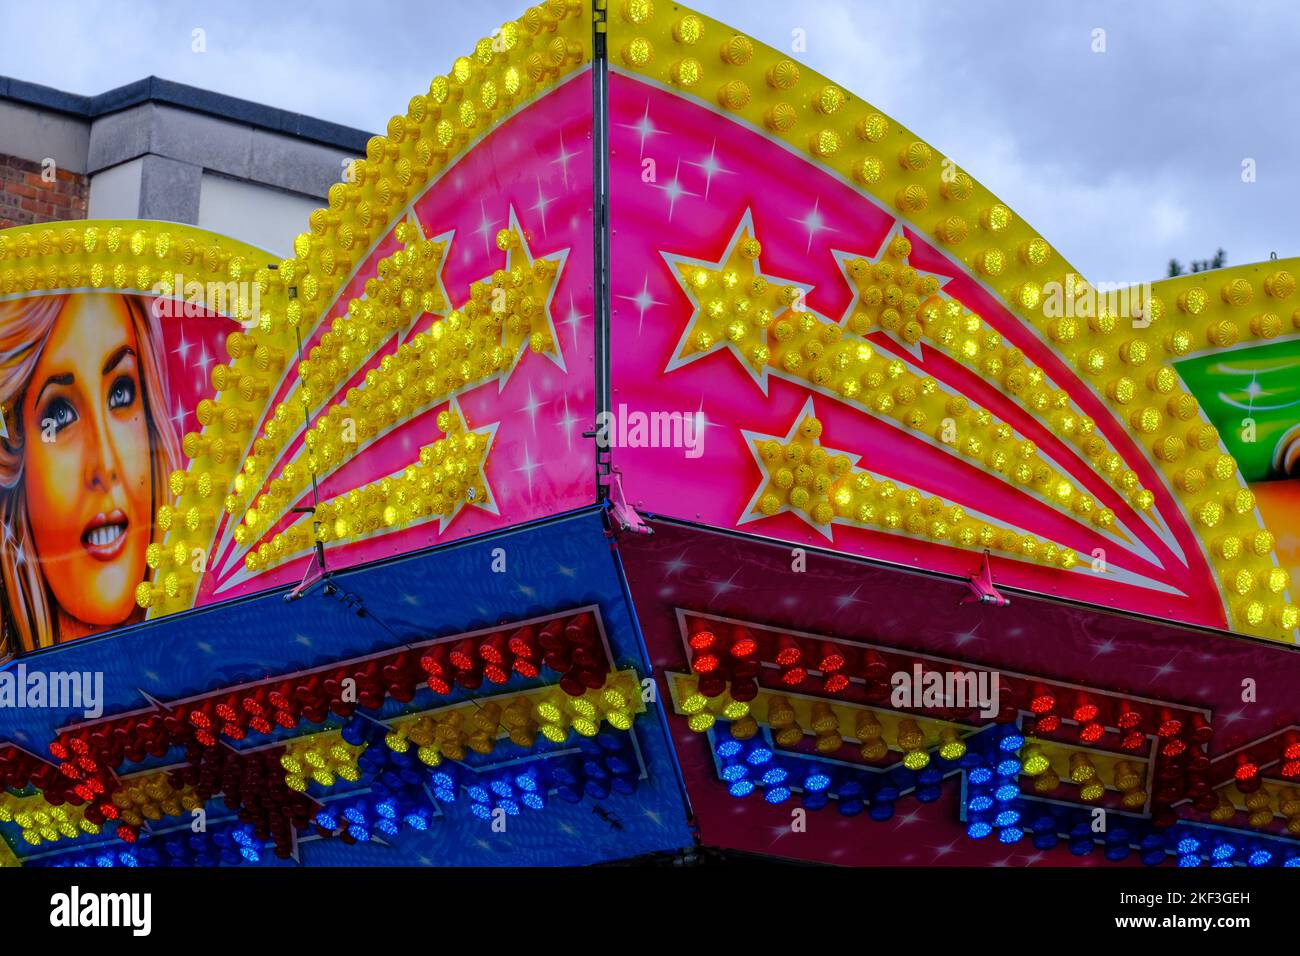 Detail of bright neon lights at outdoor fair ride with female illustration and golden shooting stars. Stock Photo